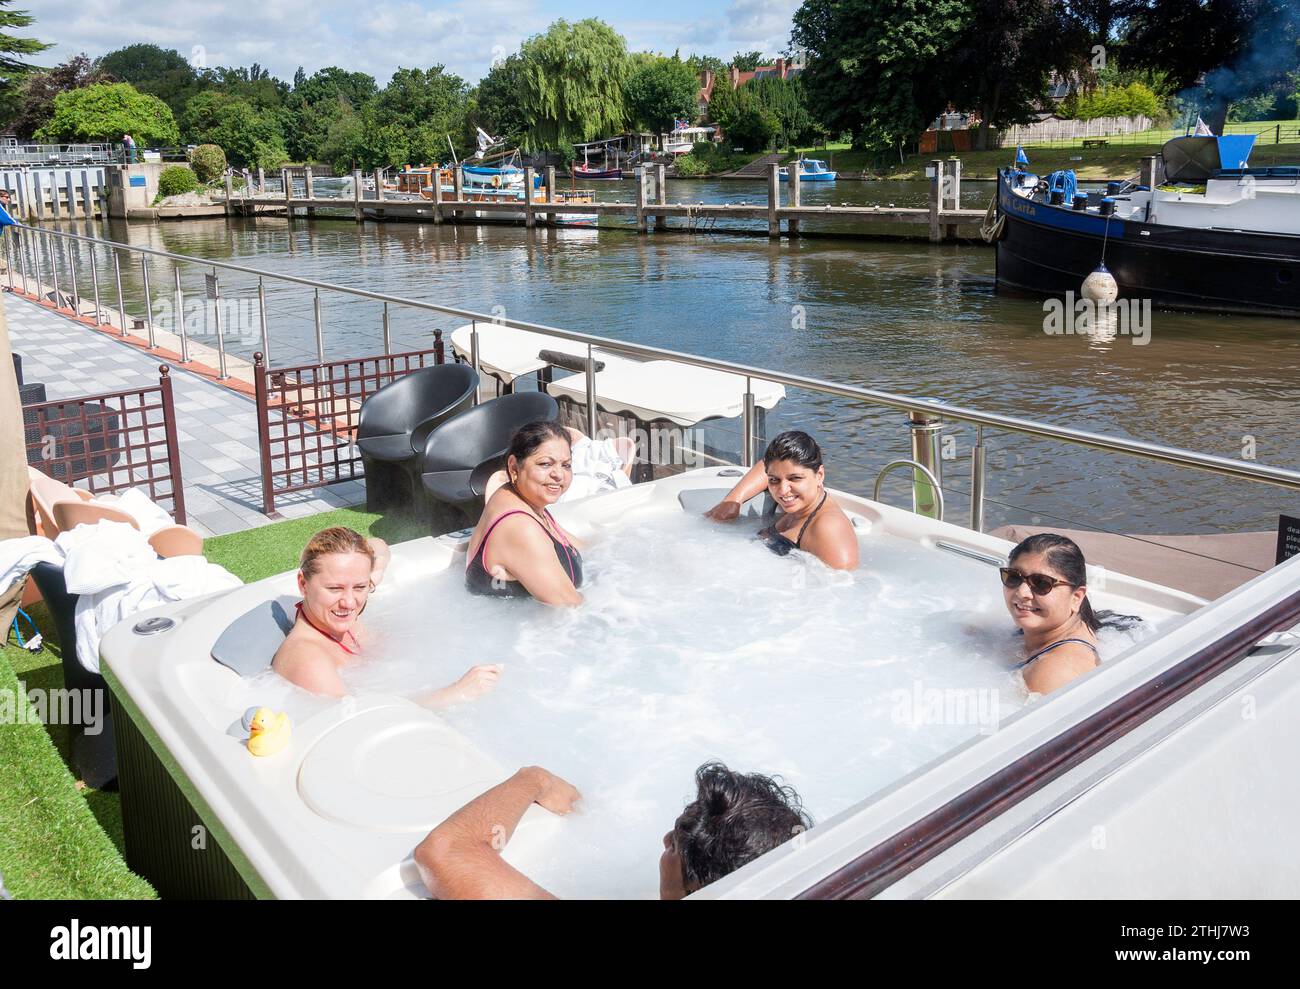 Outdoor spa pool by River Thames, Runnymede Hotel & Spa, Runnymede, Surrey, England, United Kingdom Stock Photo